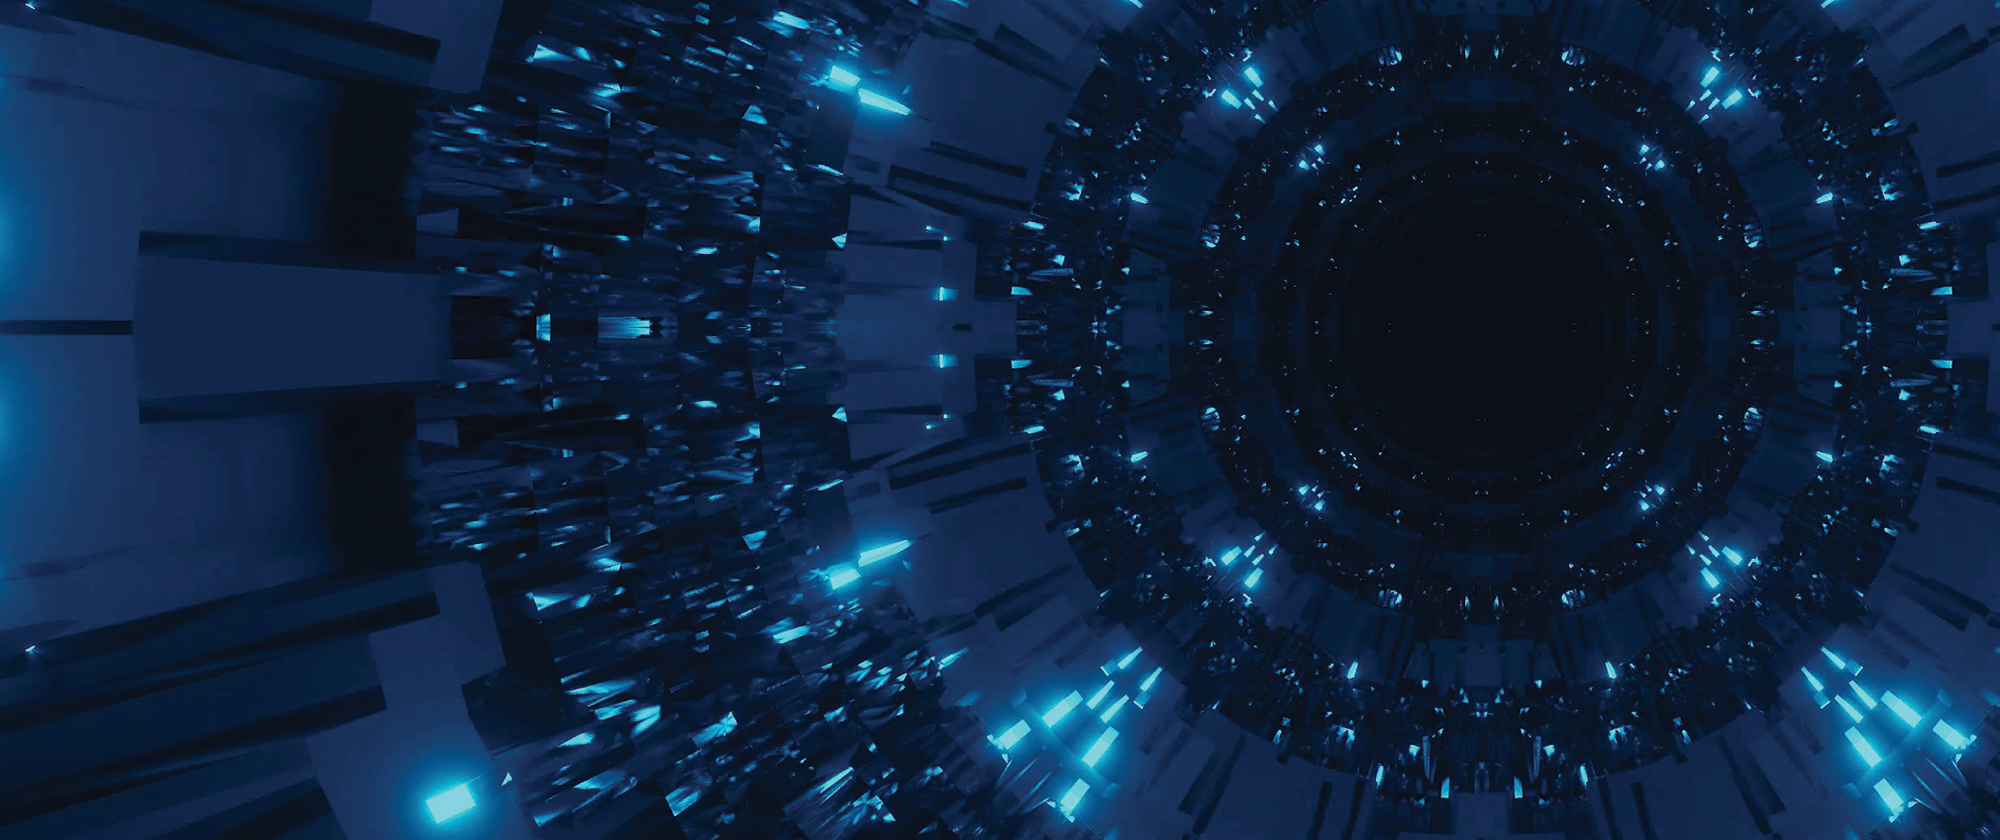 Abstract image of a futuristic blue tunnel with digital patterns and lights.